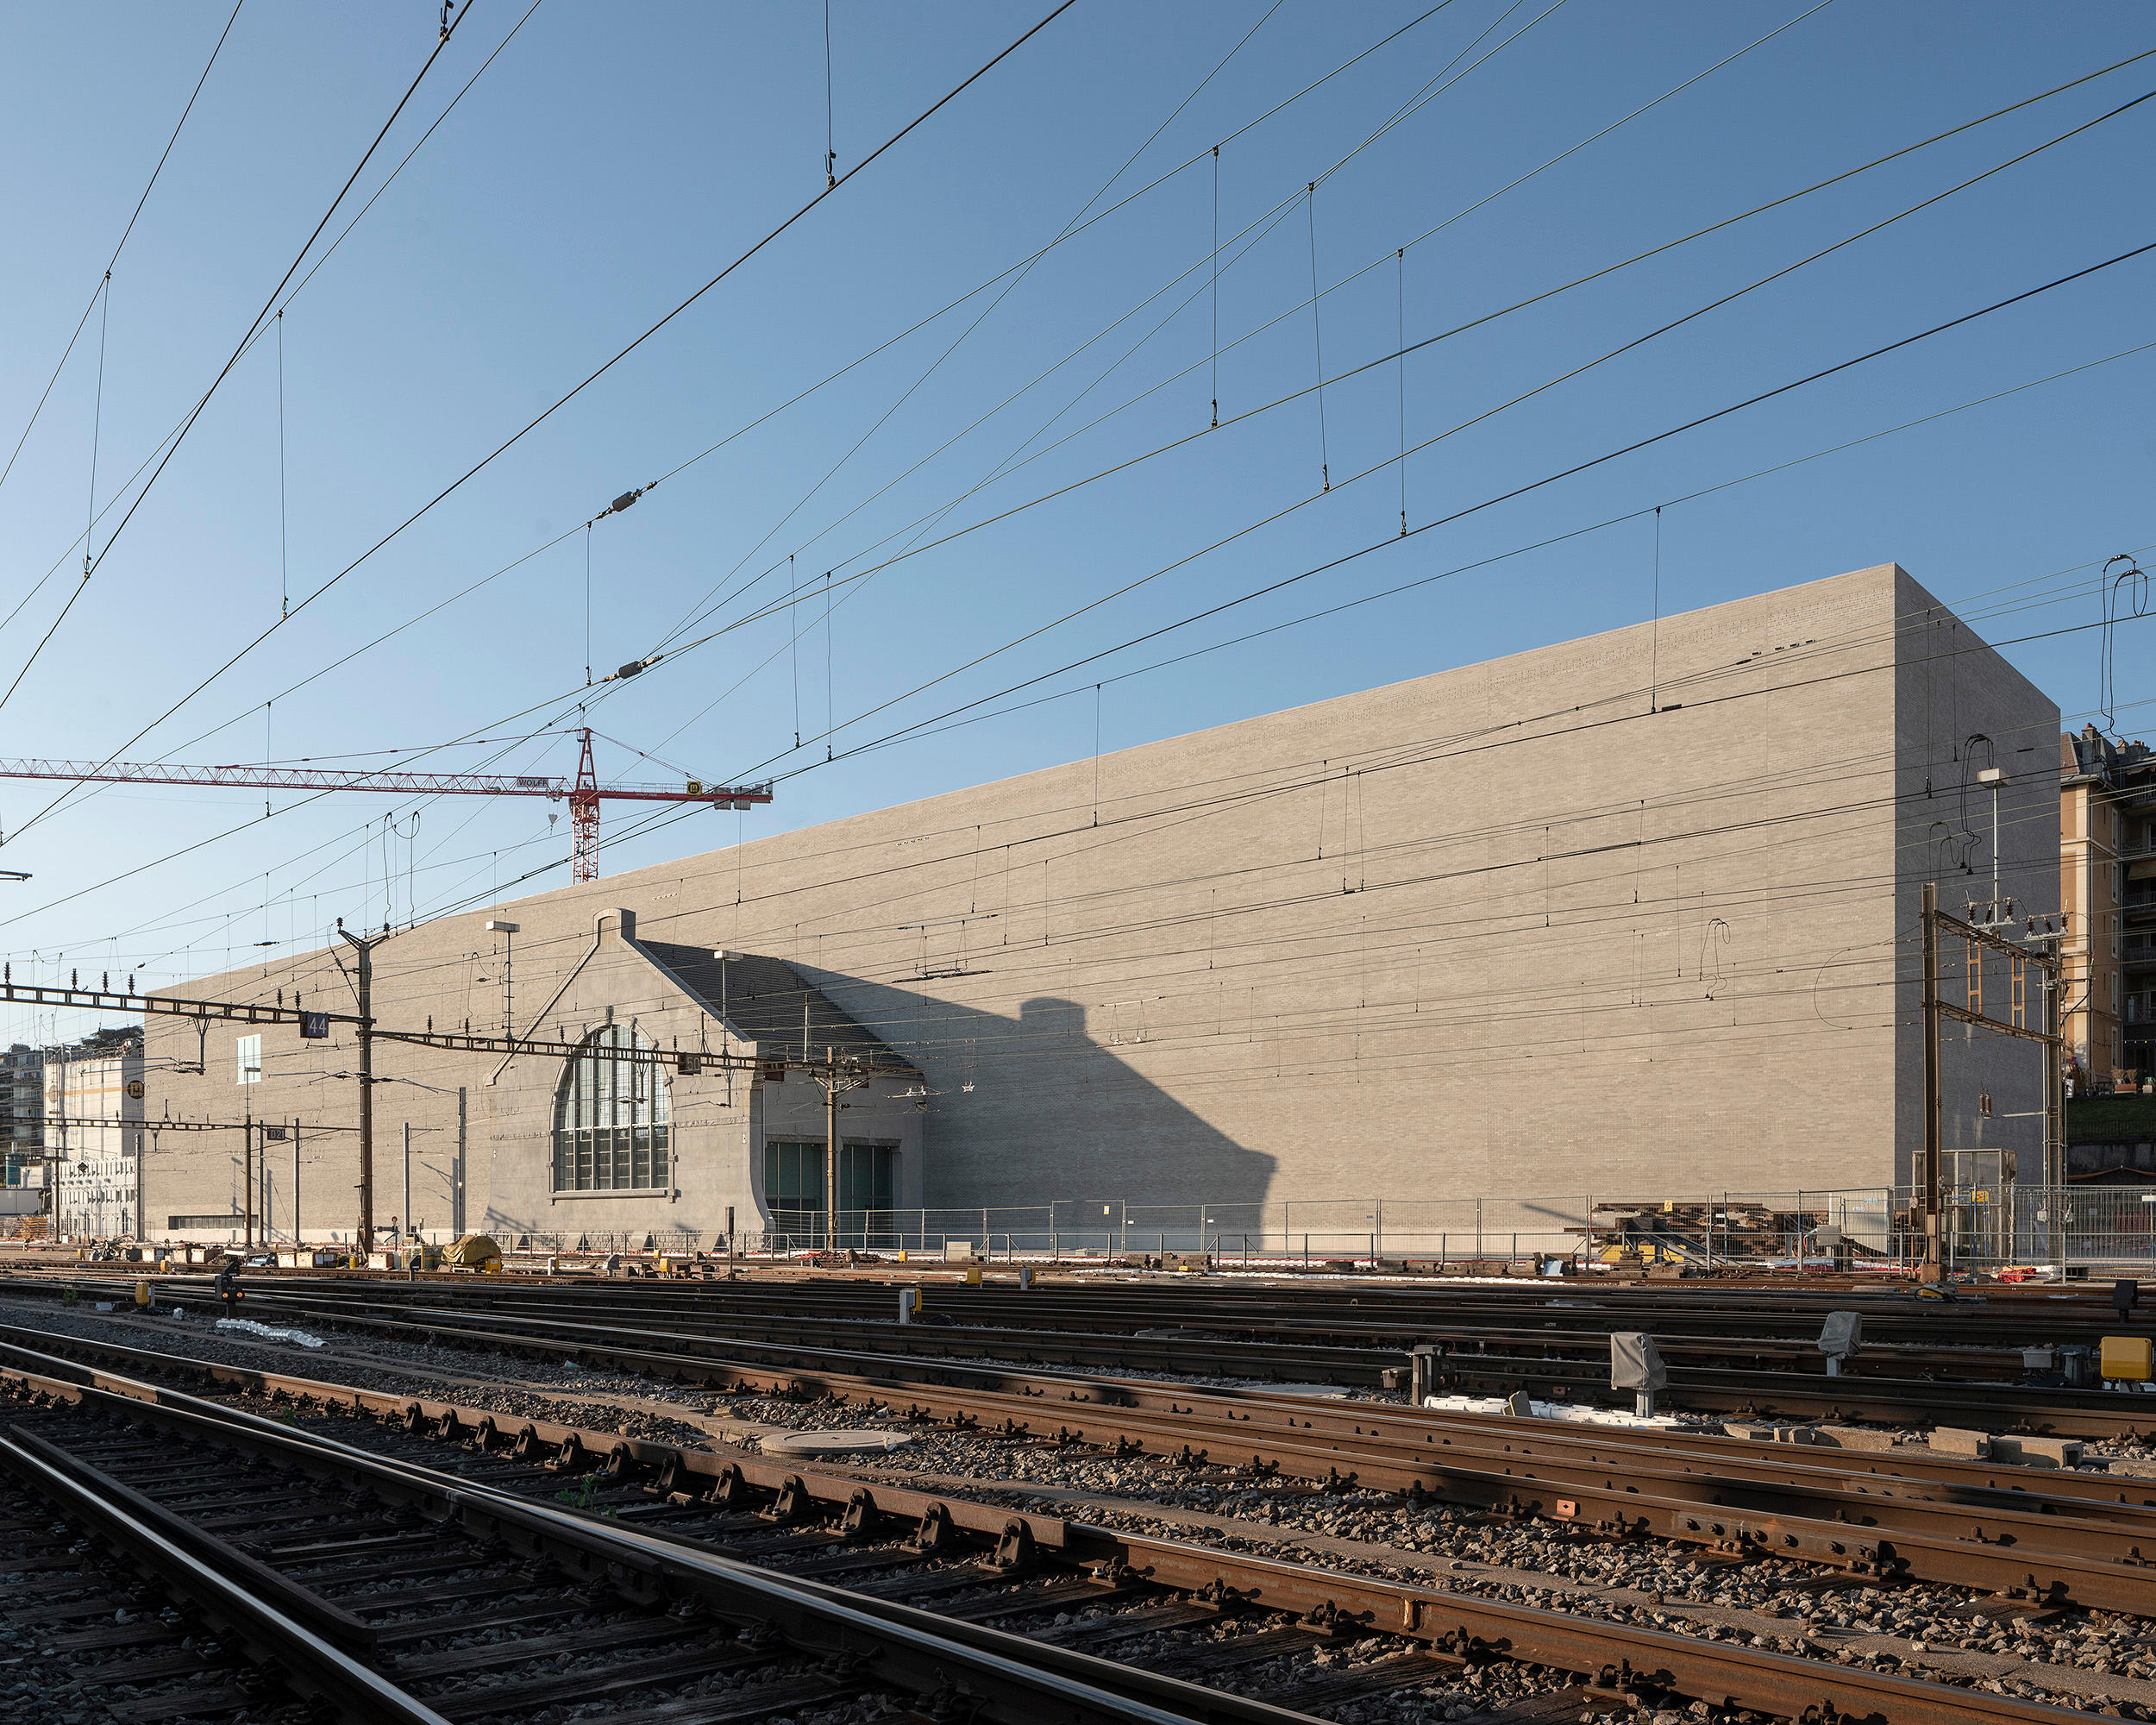 The back of the new museum overlooks the railway tracks